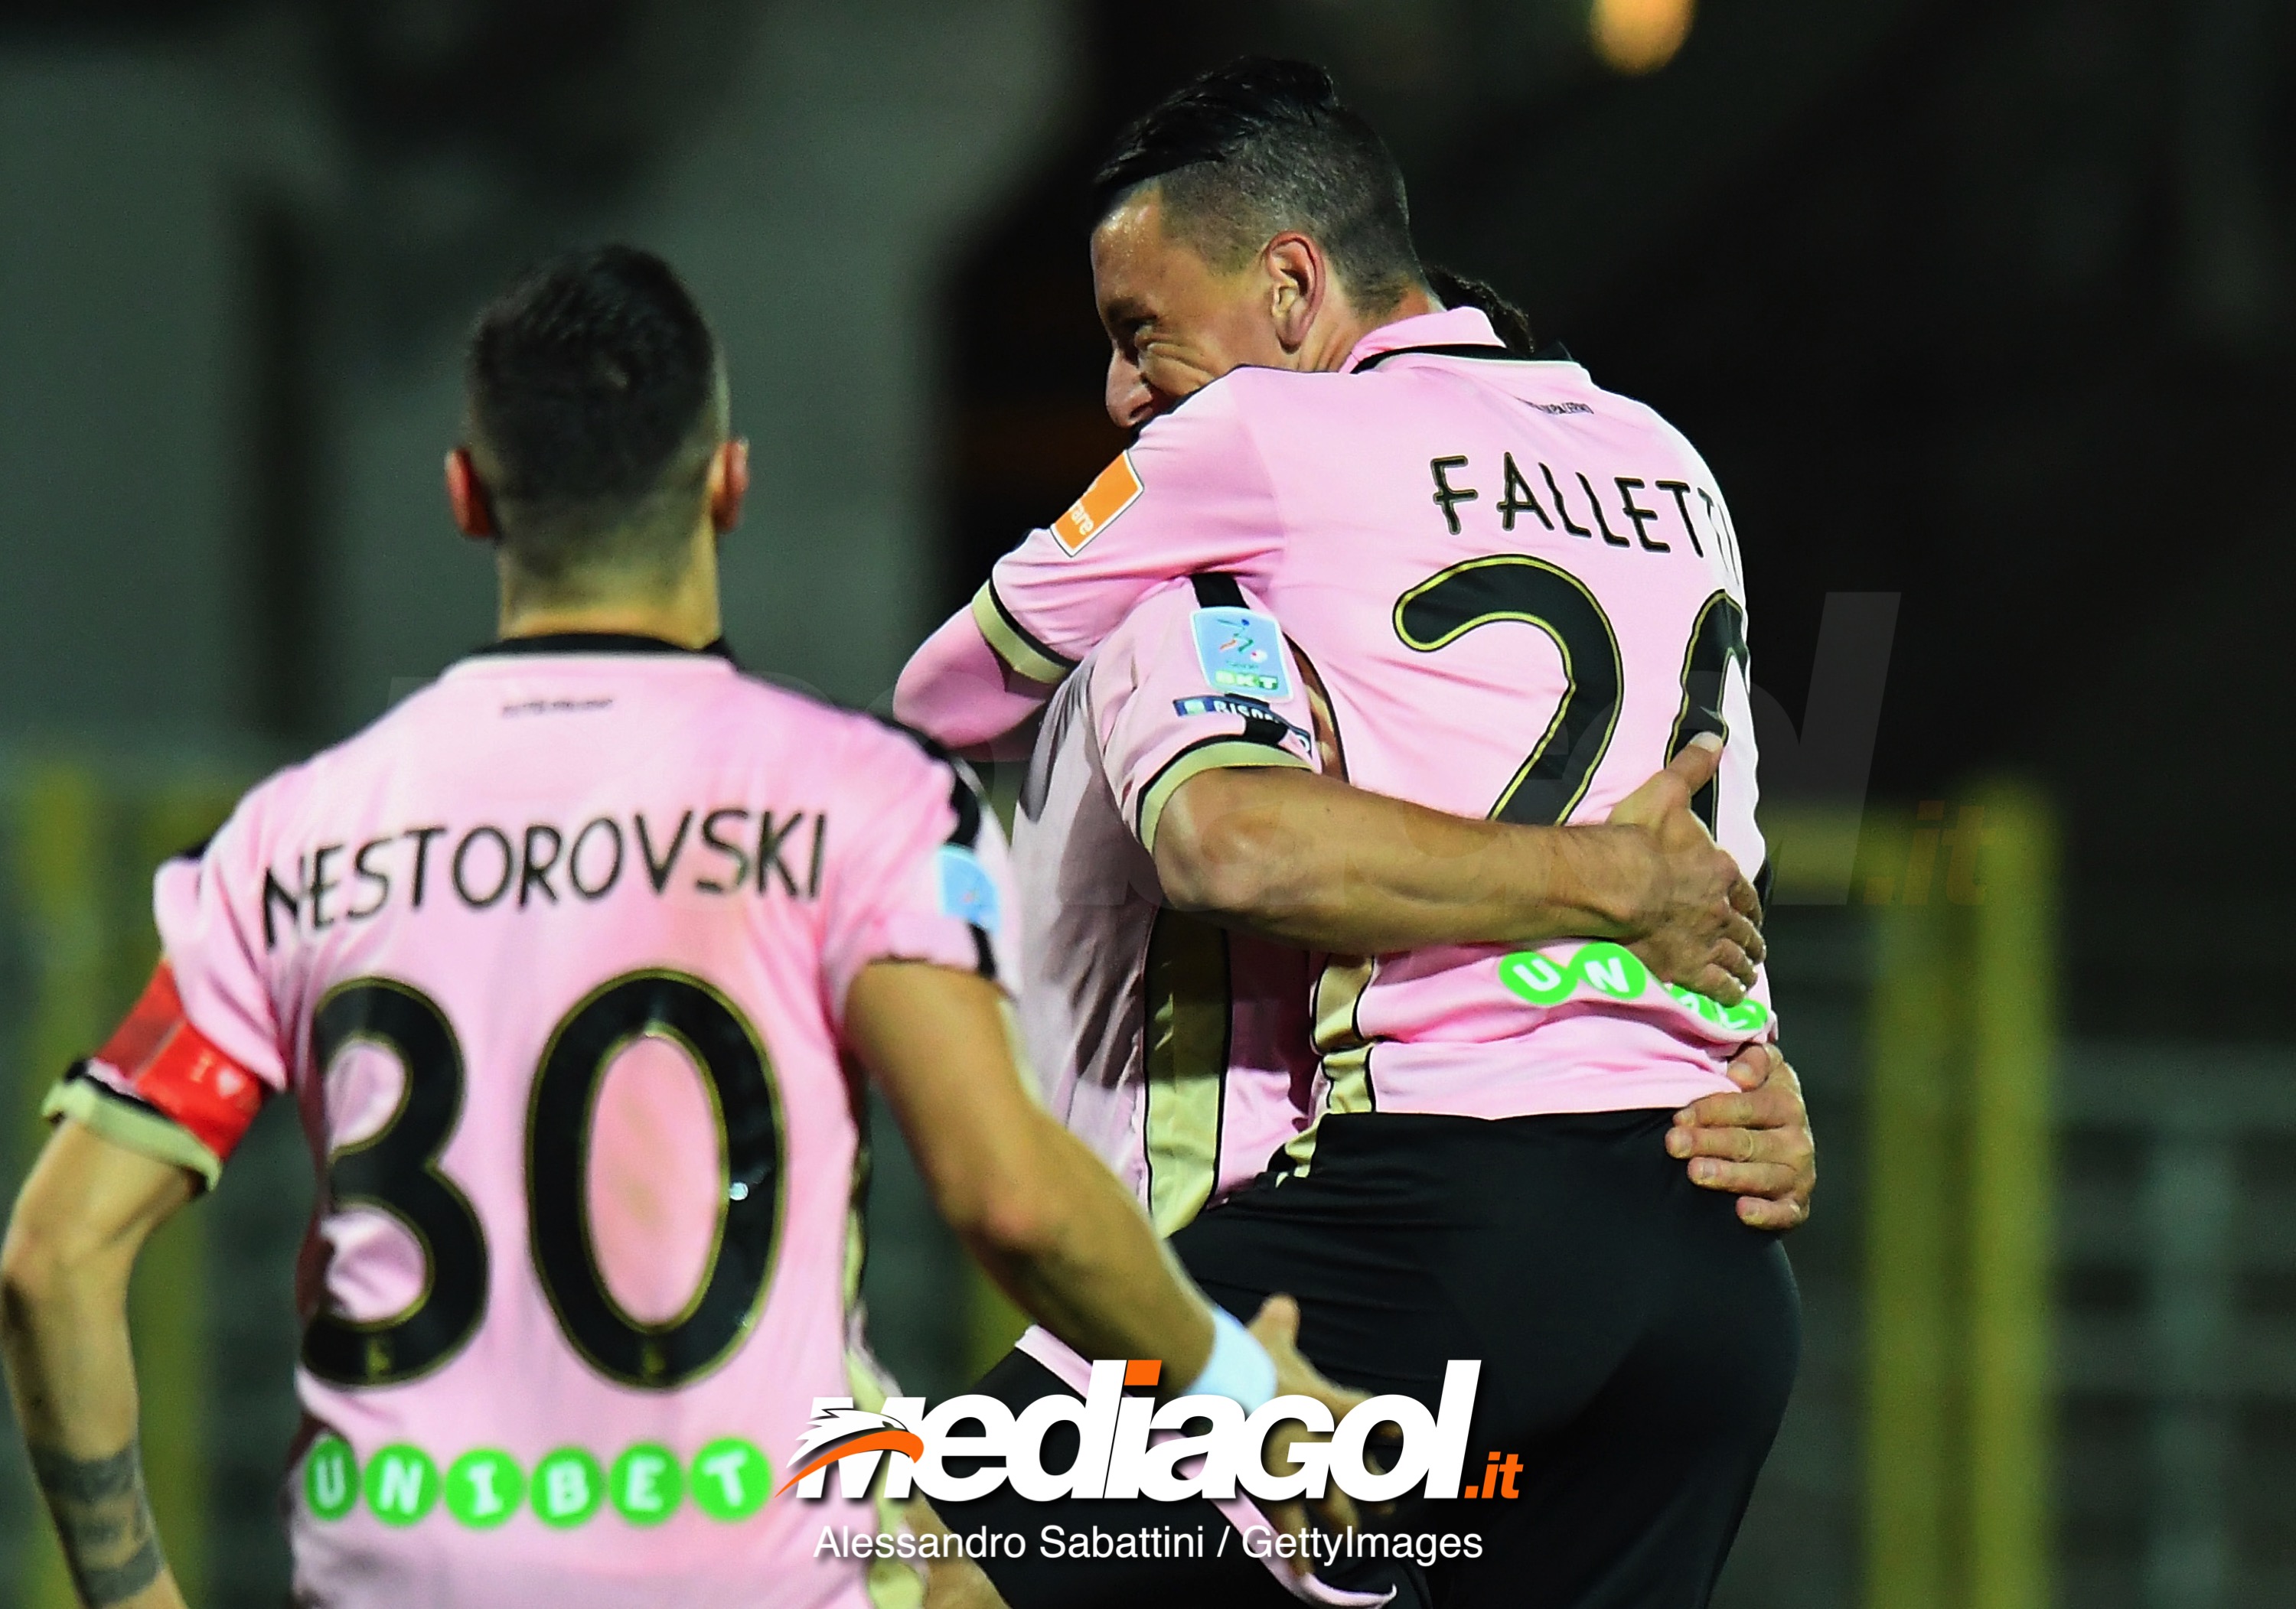 CARPI, ITALY - OCTOBER 30:  Cesar Alejando Faletti of Citta di Palermo celebrates after scoring the opening goal during the Serie b match between Carpi FC and US Citta di Palermo on October 30, 2018 in Carpi, Italy.  (Photo by Alessandro Sabattini/Getty Images) *** Local Caption *** Cesar Alejando Faletti